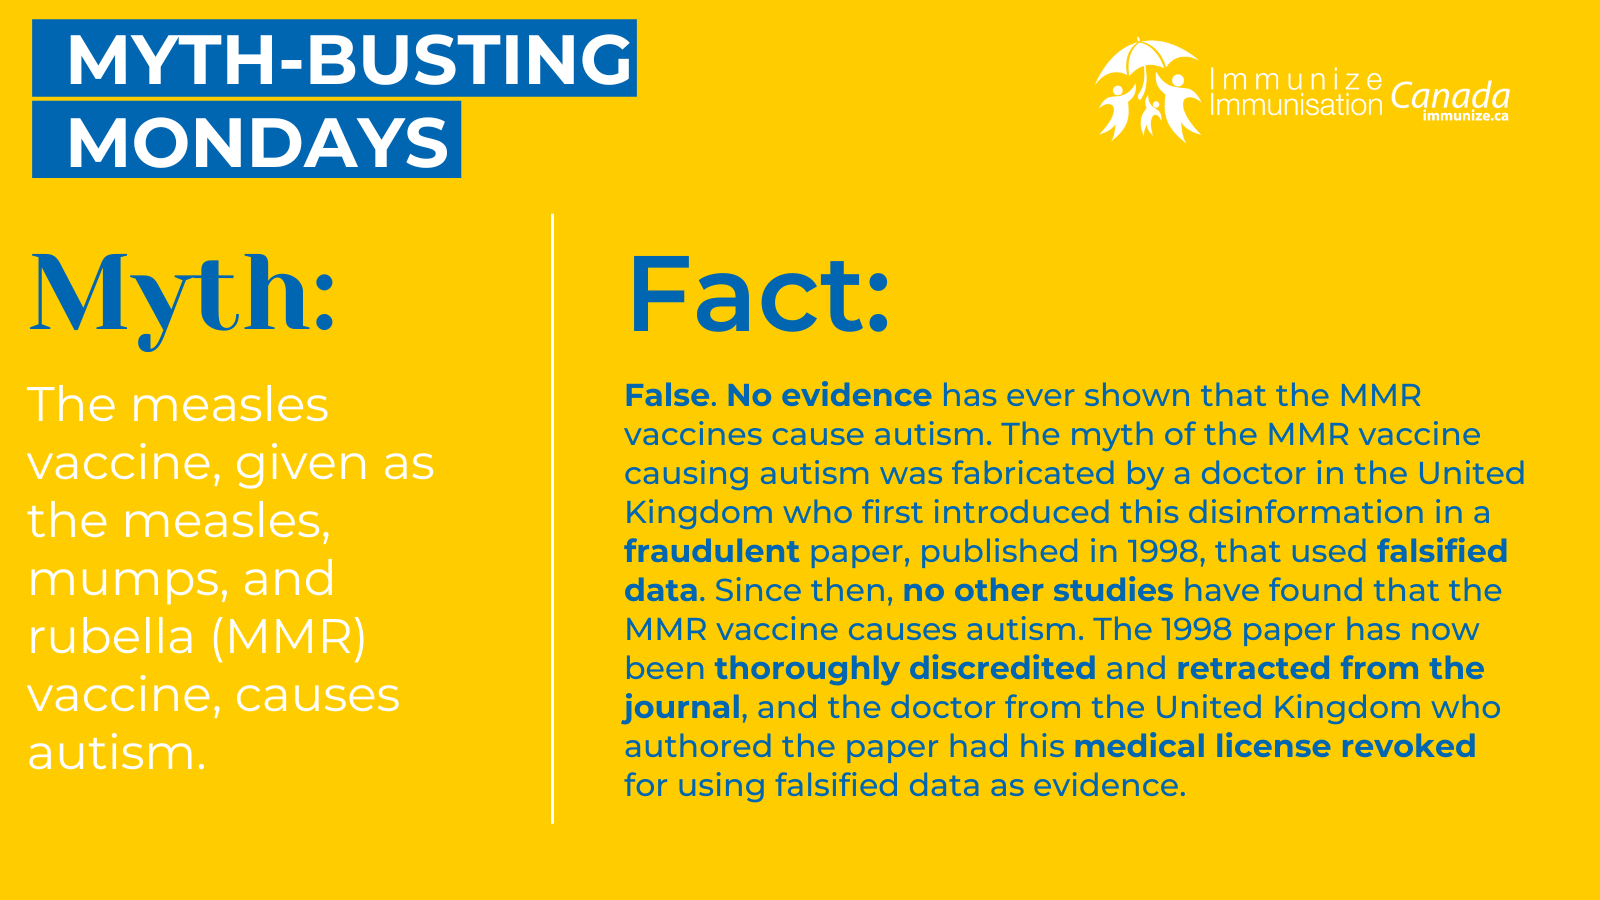 Myth-busting Mondays - measles - image 2 for Twitter